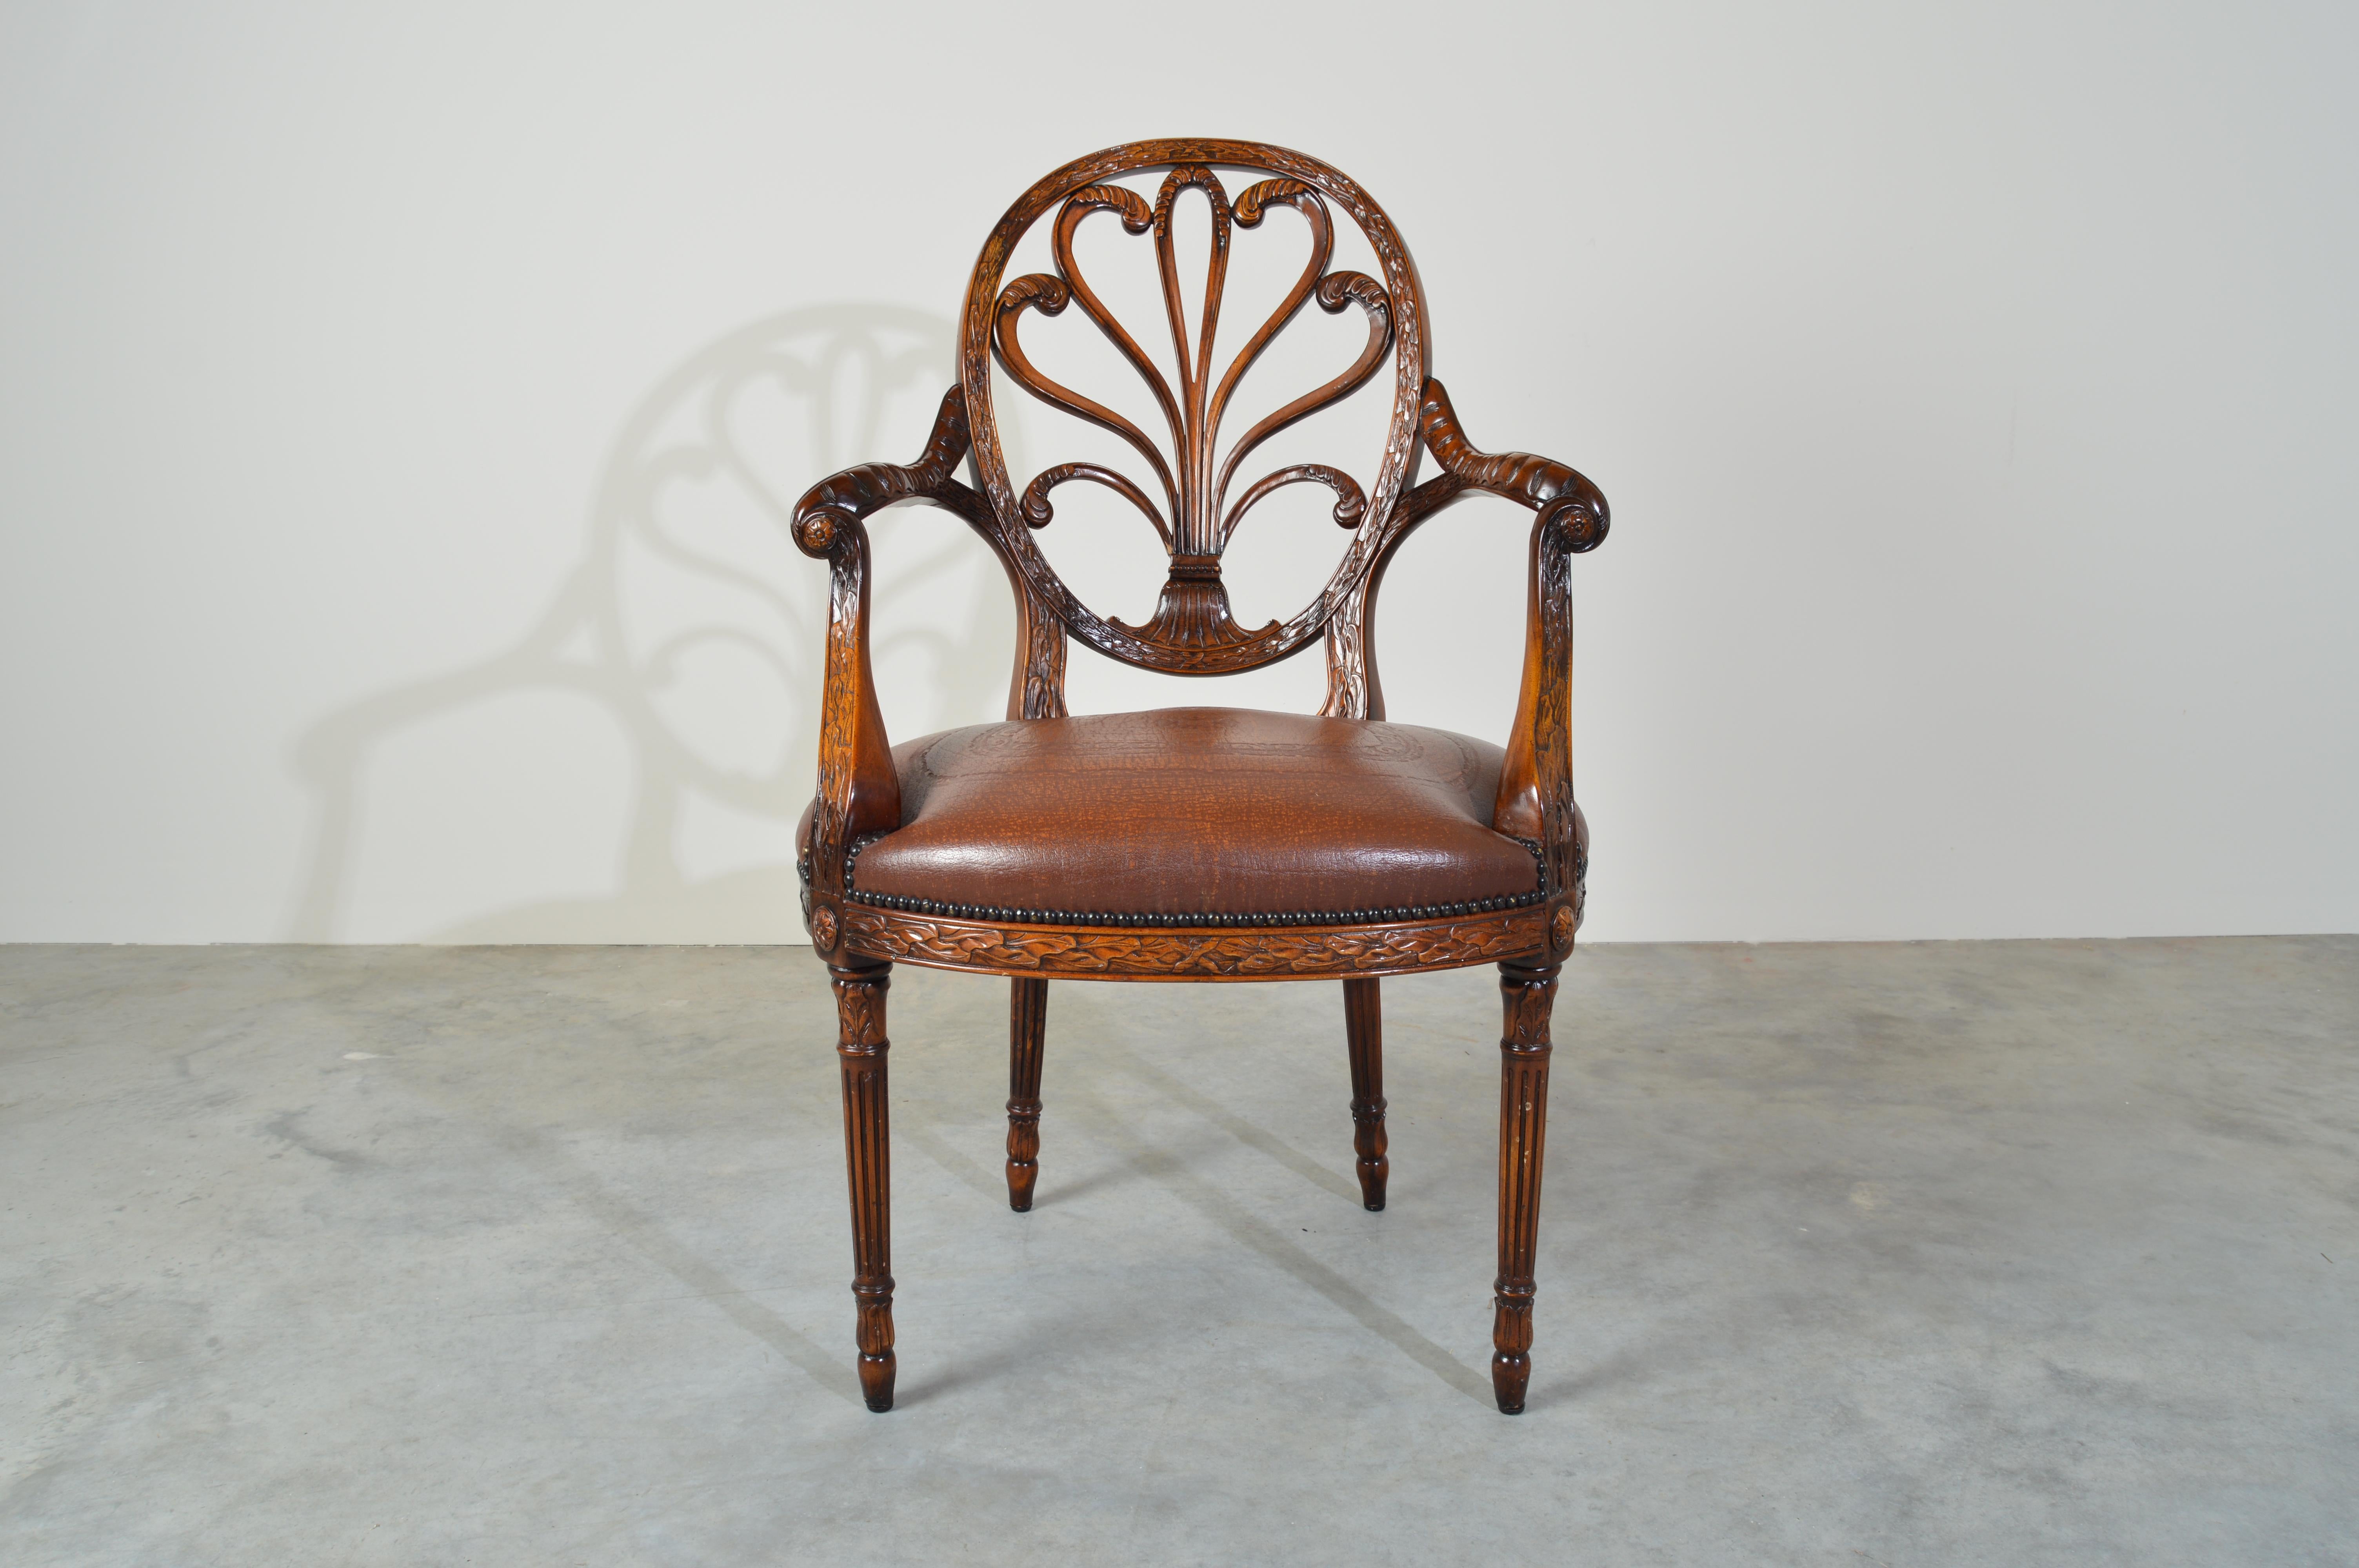 Theodore Alexander neoclassical carved back open armchair having tooled leather seat with scrolled armrests.
Outstanding condition. Well maintained ready for use.